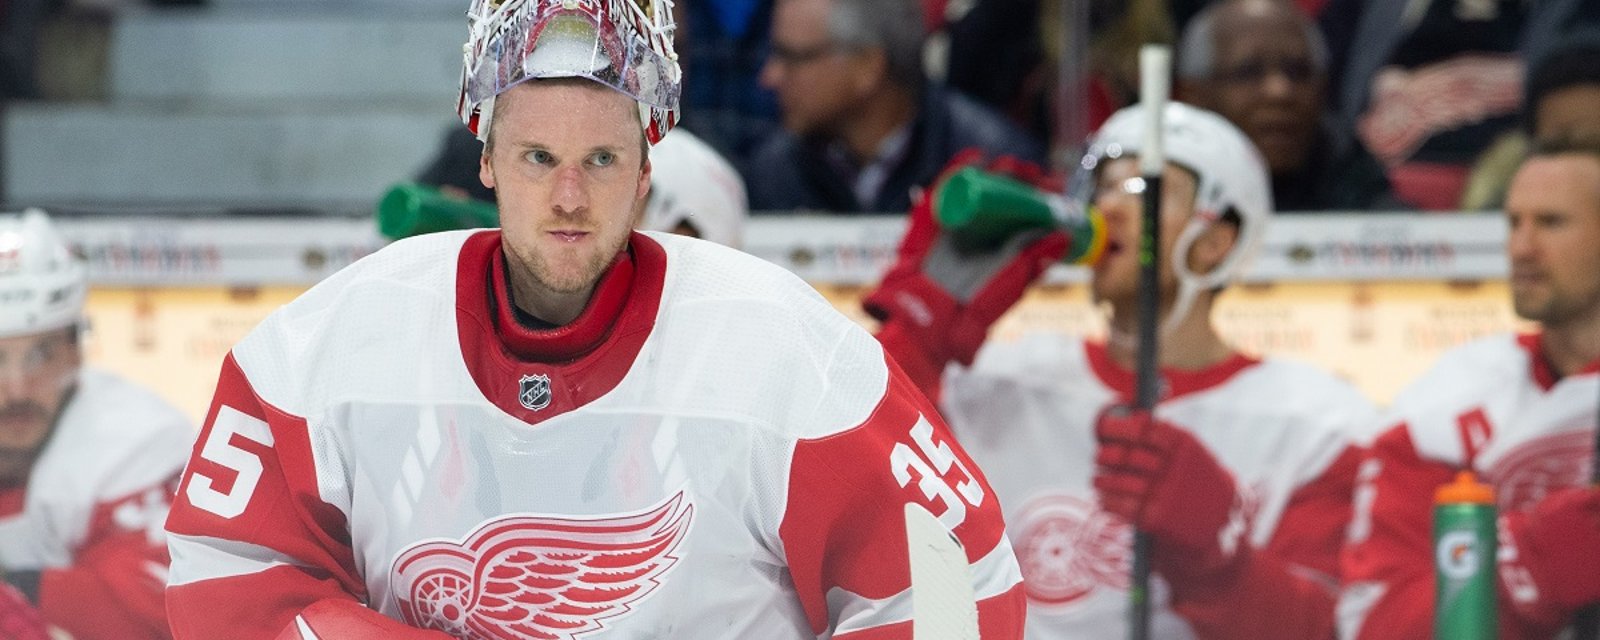 Rumor: As many as 3 Red Wings may be on the trading block.